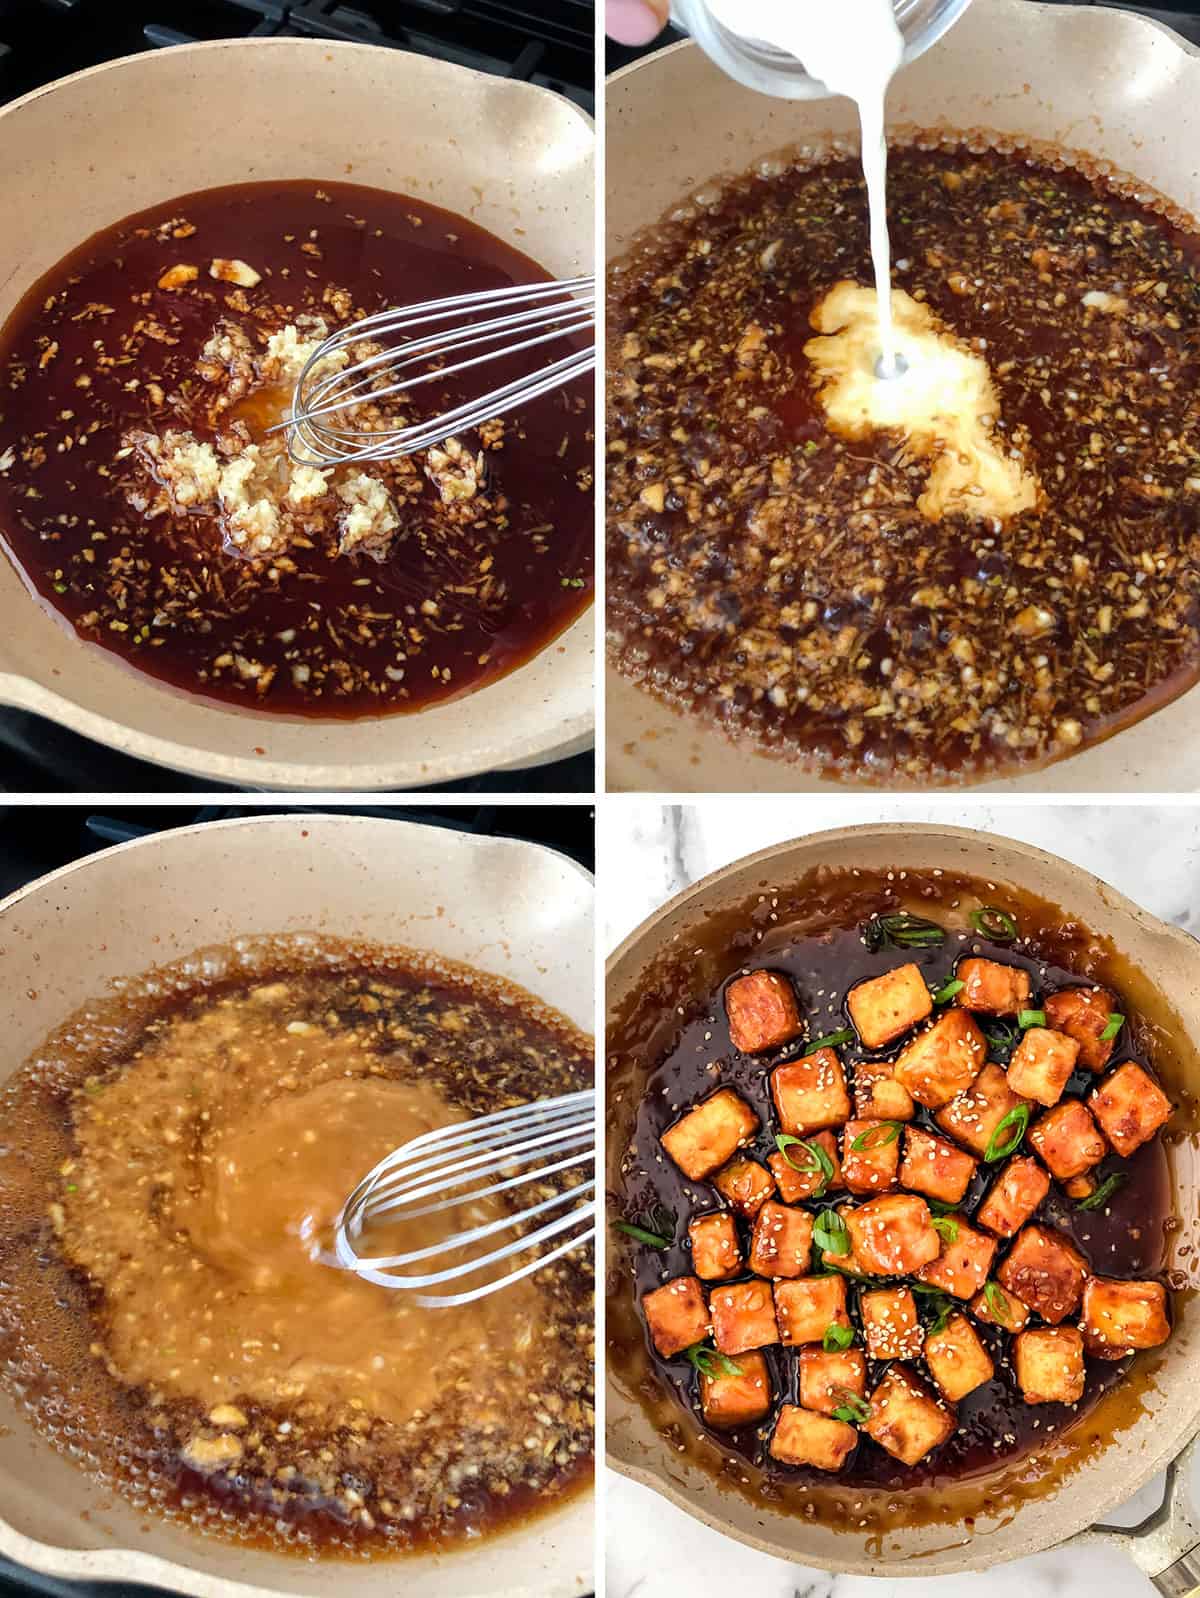 Four photos showing stages of making teriyaki sauce.